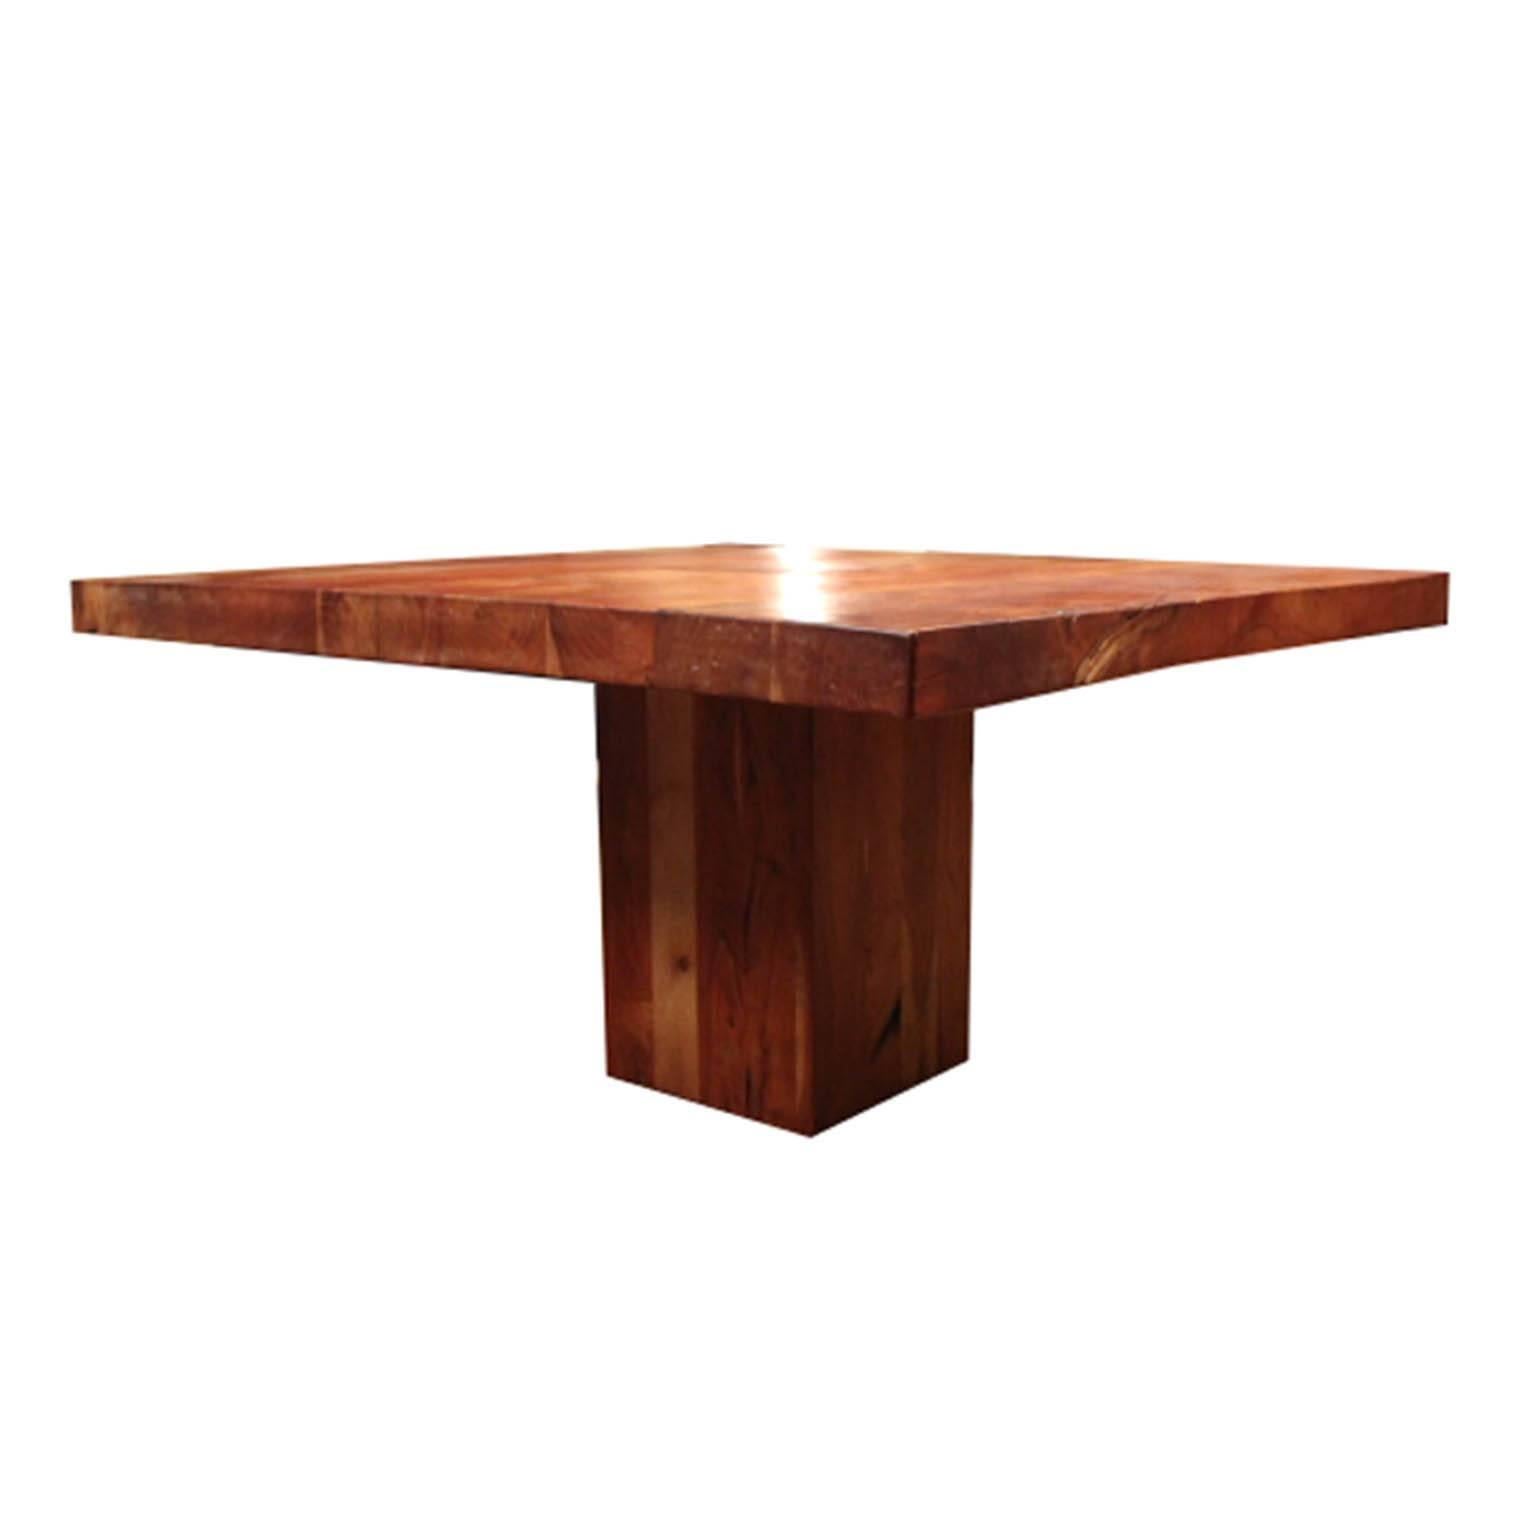 Custom solid cherry square dining table with walnut butterfly joints. The top has a square cutout that rests on a solid center piece.
Custom-made by Jaxon Home Furnishings.